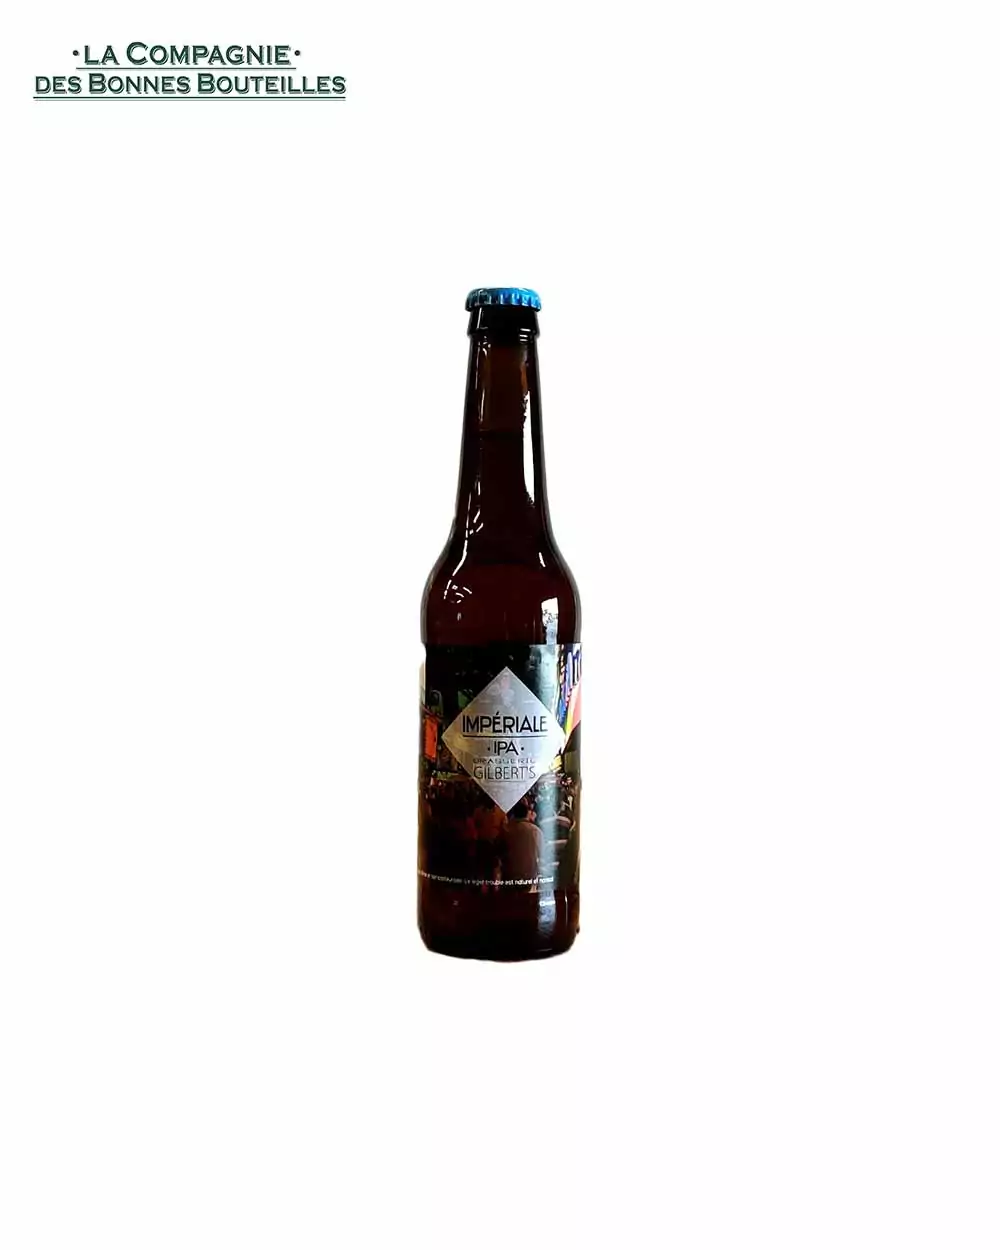 Bière Gilbert's Imperiale IPA 33cl